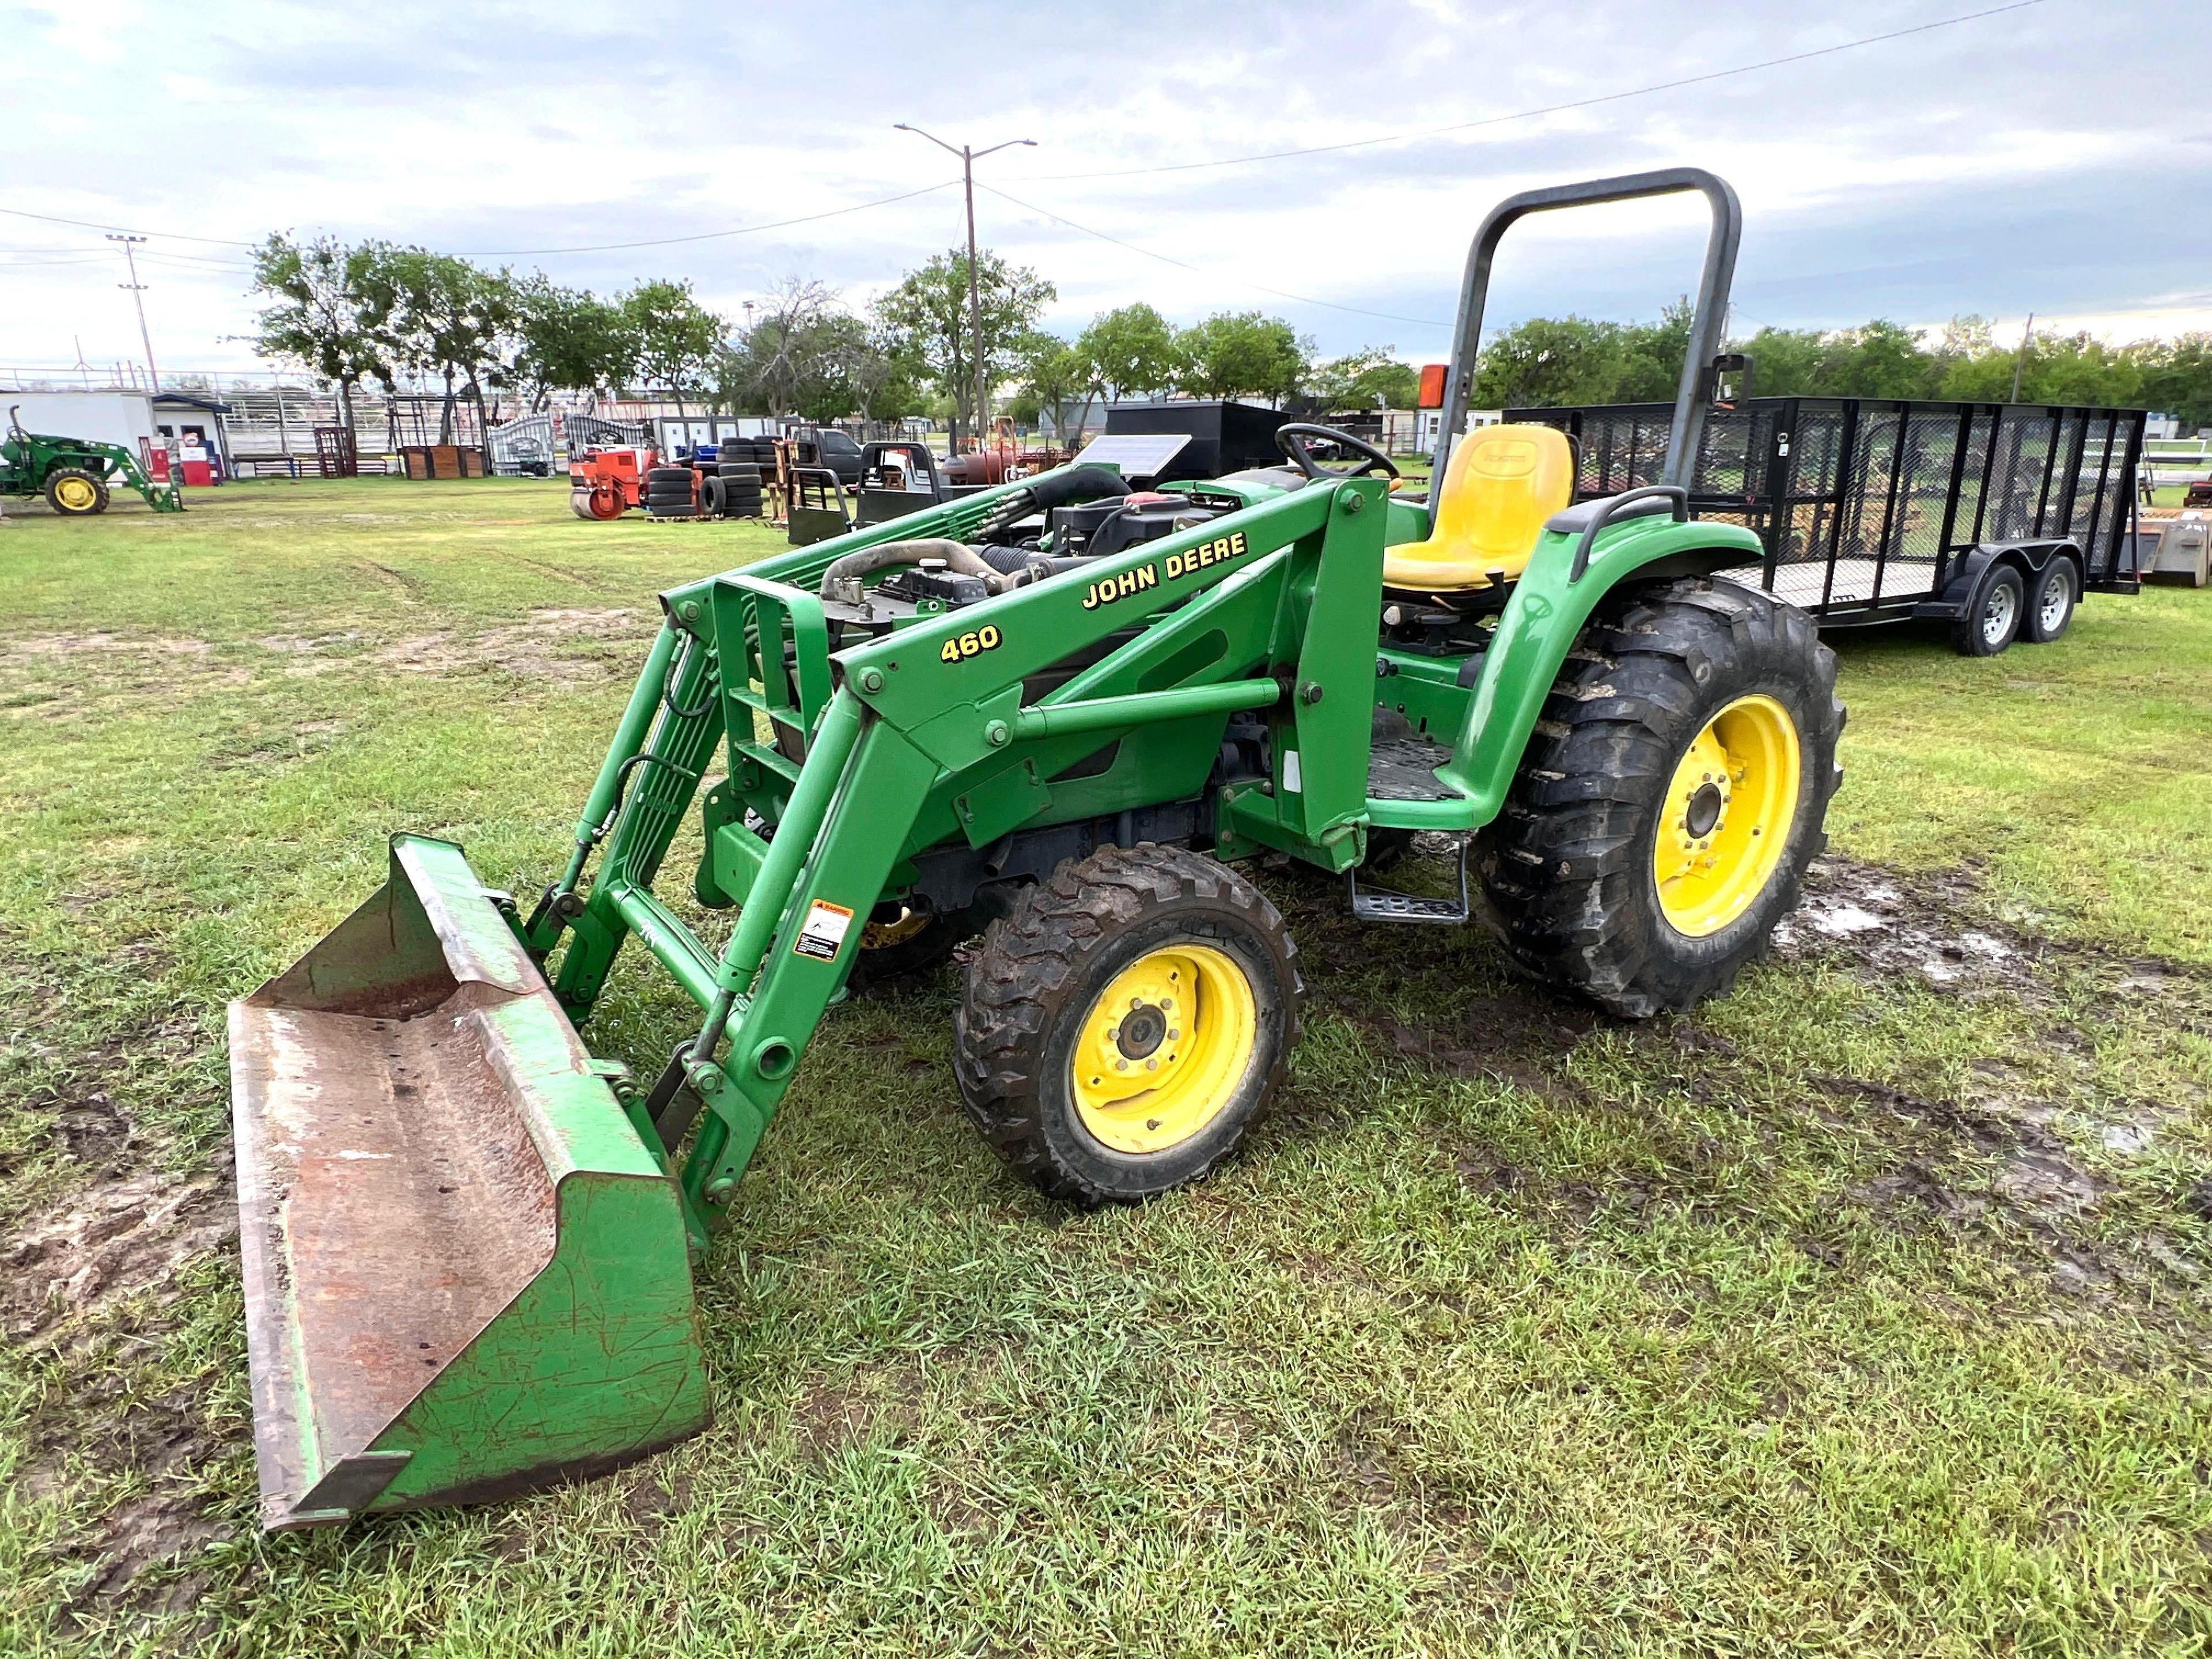 John Deere 4500 Tractor with 460 Front Loader - 813 hours - 4x4 - Missing the hood